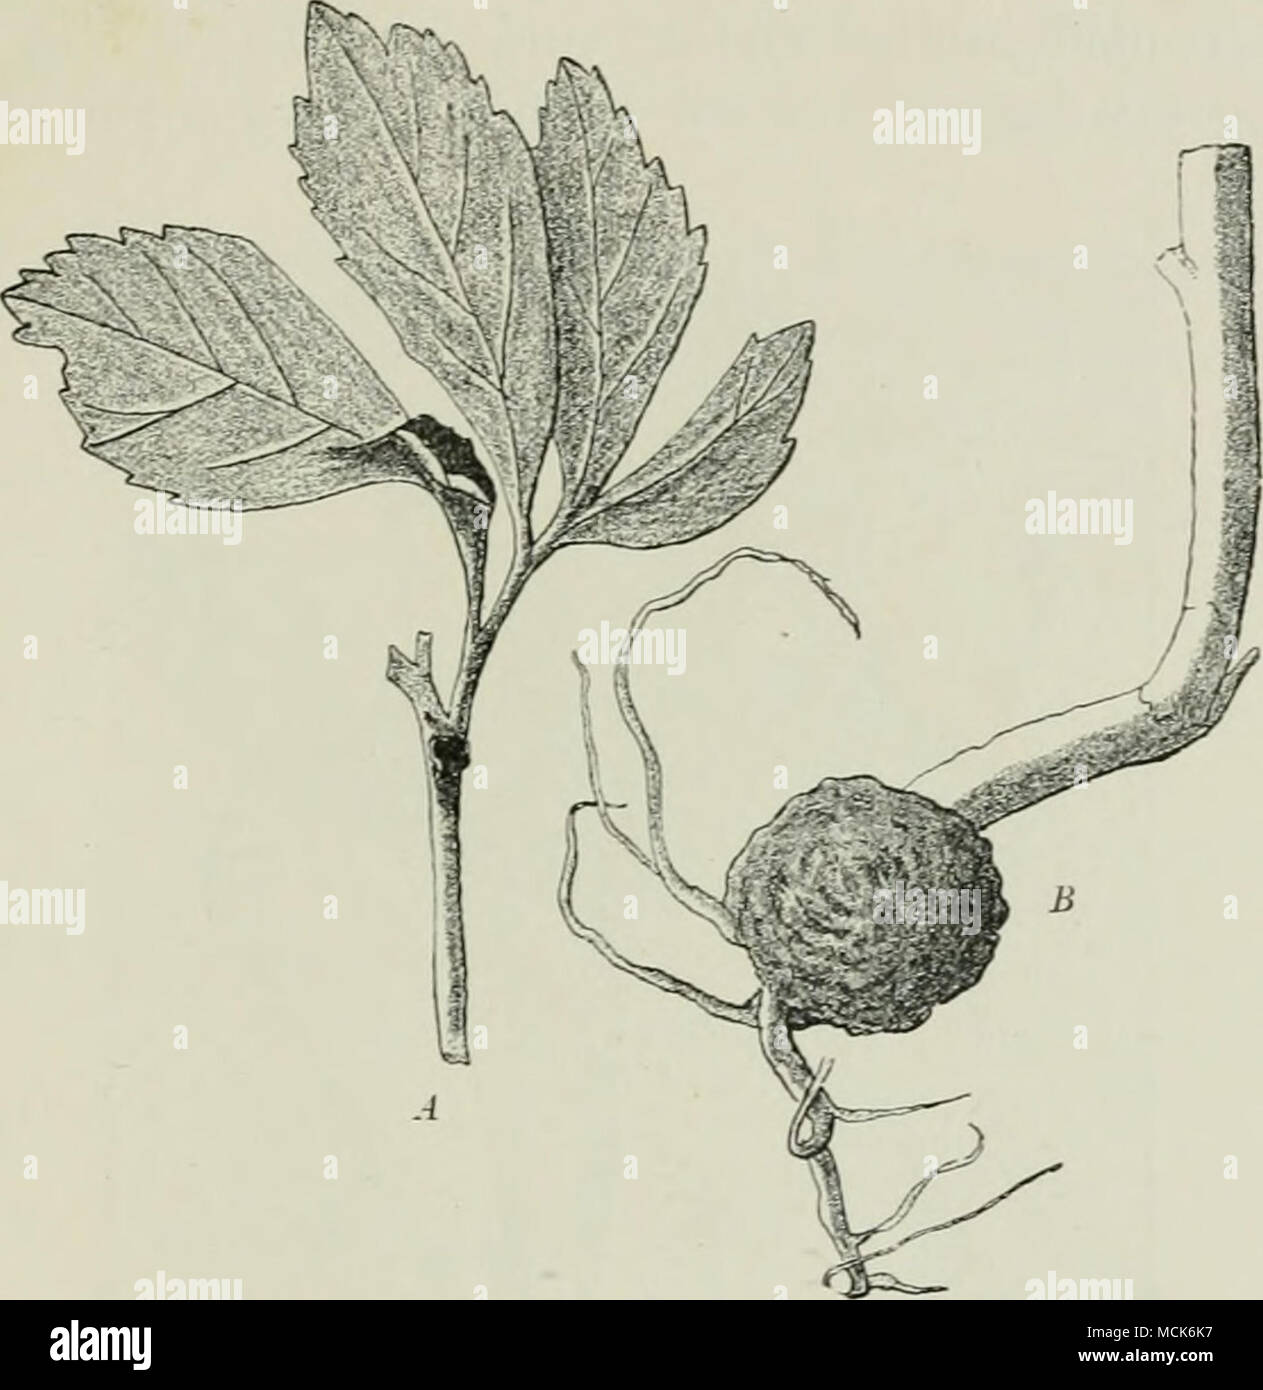 . Fig. 173.—A, Urocyitu anemones on Hellebore. Spore-patches on stalk and mid-rib. (v. Tubeuf del.; specimen from Herr Schnabl of Munich.) B, Urocystis Leimbachii (U. anemones), causing swelling at base of stem of Adonis oAStivo.lis. (v. Tubeuf del.; specimen from Prof. Stahl of Jena.) U. violae (Sow.). (Britain and U.S. America.) The deforma- tions induced by this brand are not uncommon on Viola odorata in gardens, also on V. tricolor, V. ladcnsis, and V. hirta. Its presence is shown externally by the marked thick- ening and malformation of leaf-petioles, runners, leaves, and fruit-stalks (Fi Stock Photo